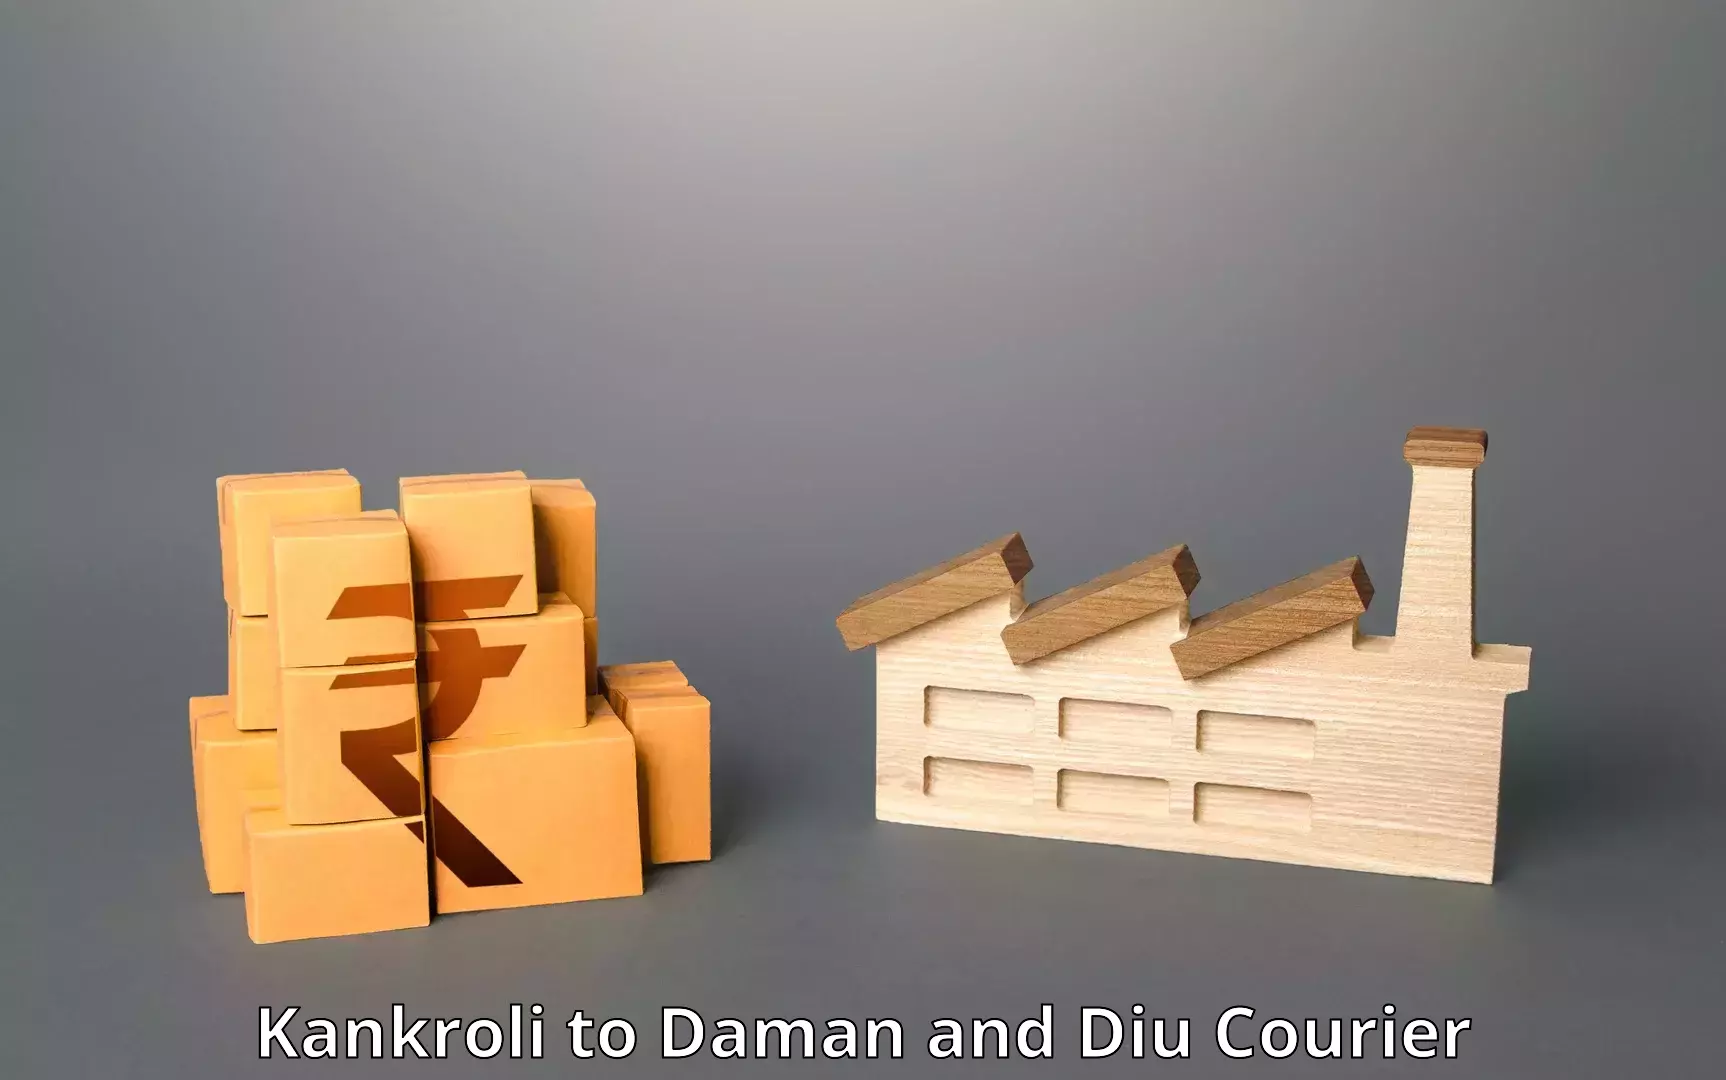 State-of-the-art courier technology Kankroli to Daman and Diu